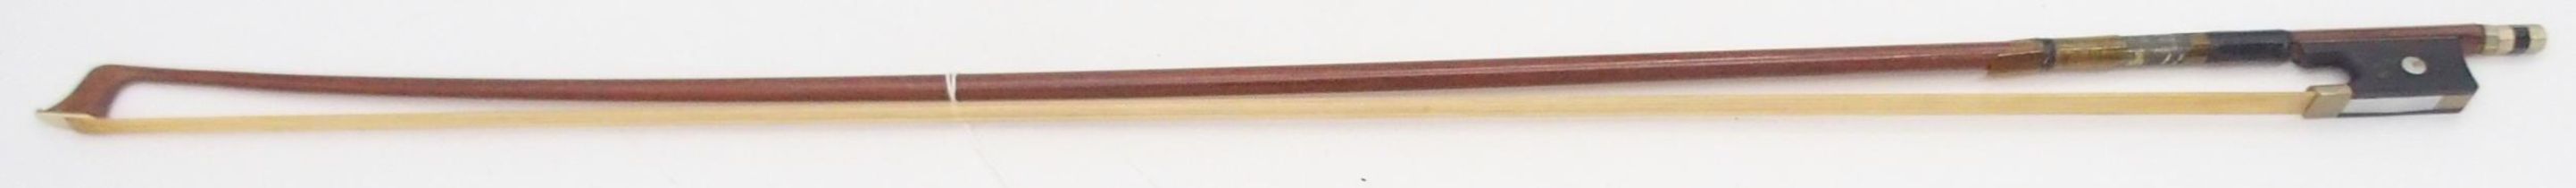 A violin bow 71 grams with inscribed maker's mark SAXONIA Condition Report:Available upon request